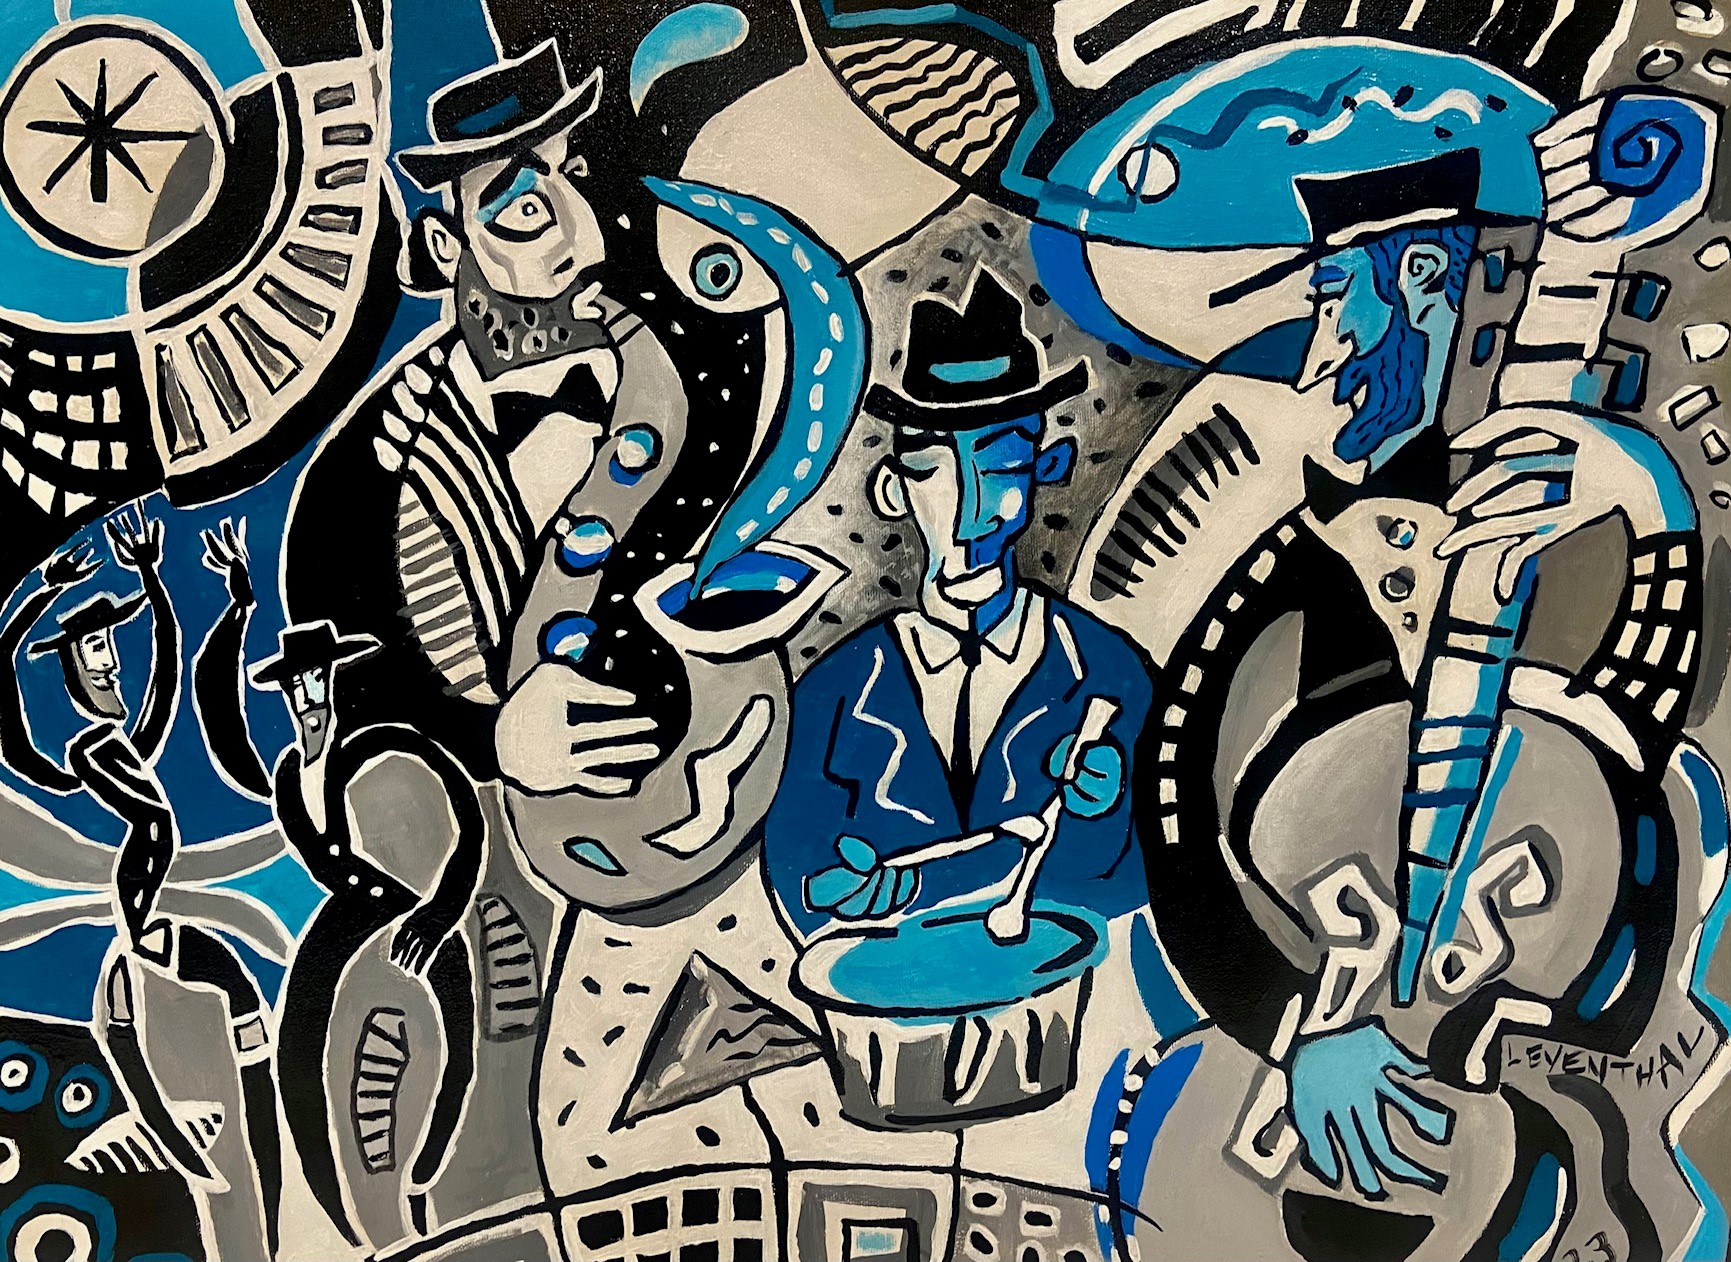 Klezmer in Blue, by Ian Leventhal